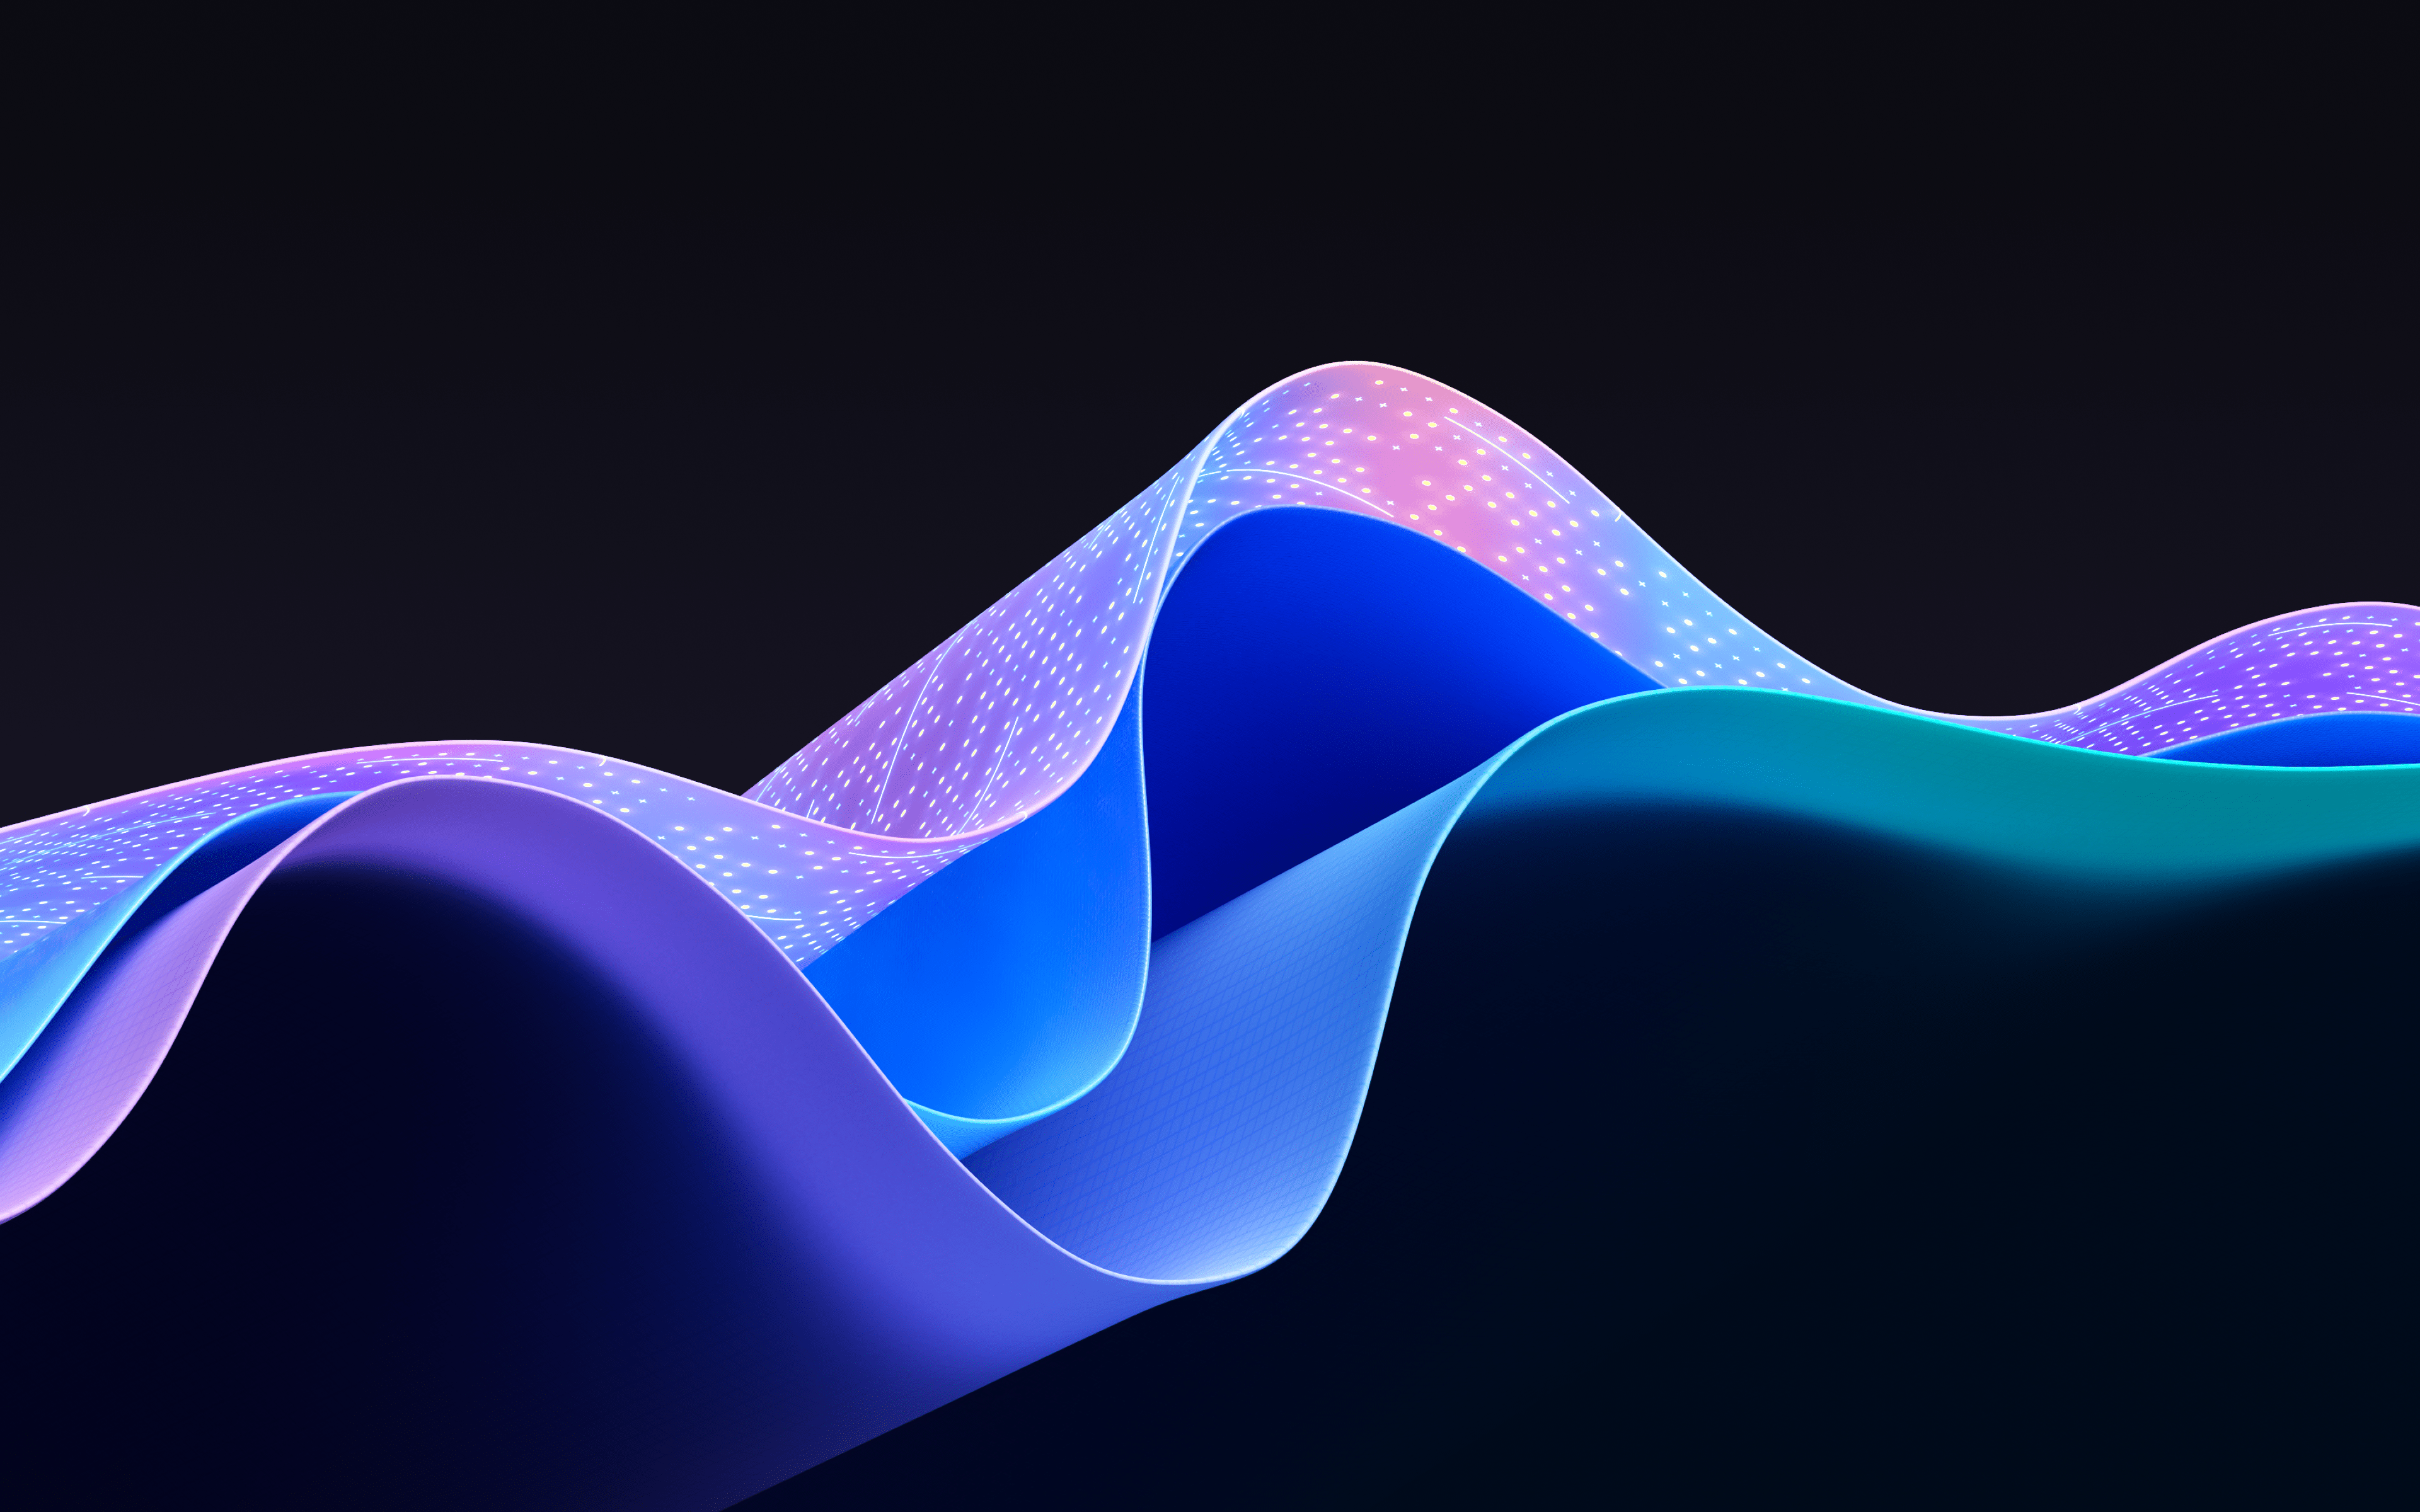 A wave of blue and purple lights on a black background - Windows 11